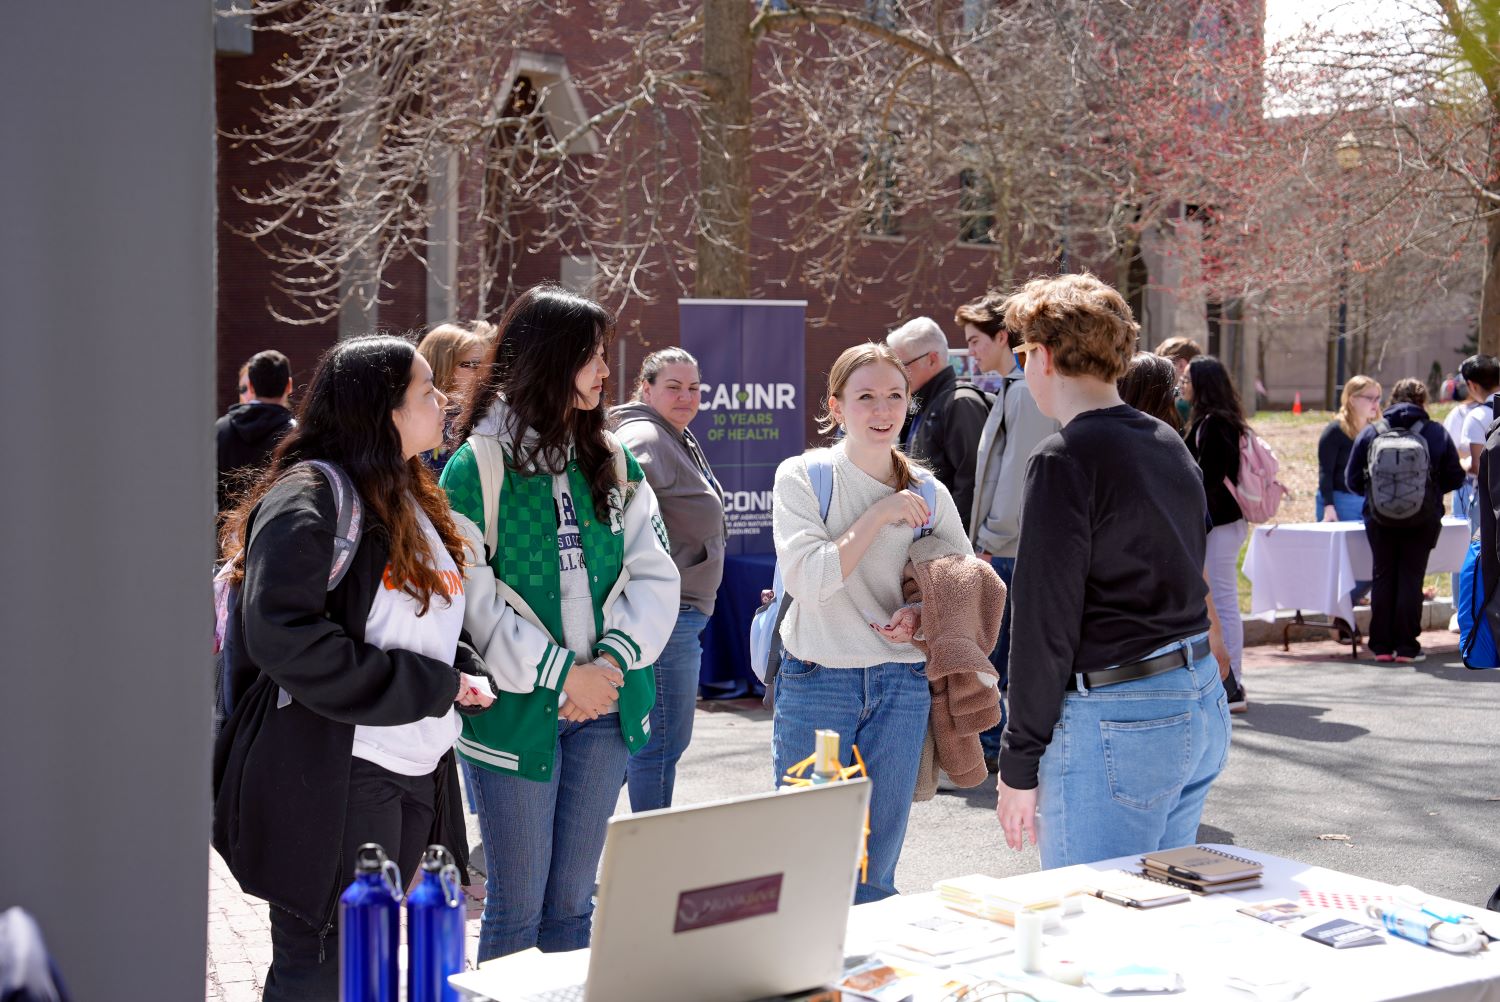 Students, faculty, and alumni from health majors across the university celebrated World Health Day on Fairfield Way with informational and interactive events (Jason Sheldon/UConn Photo)